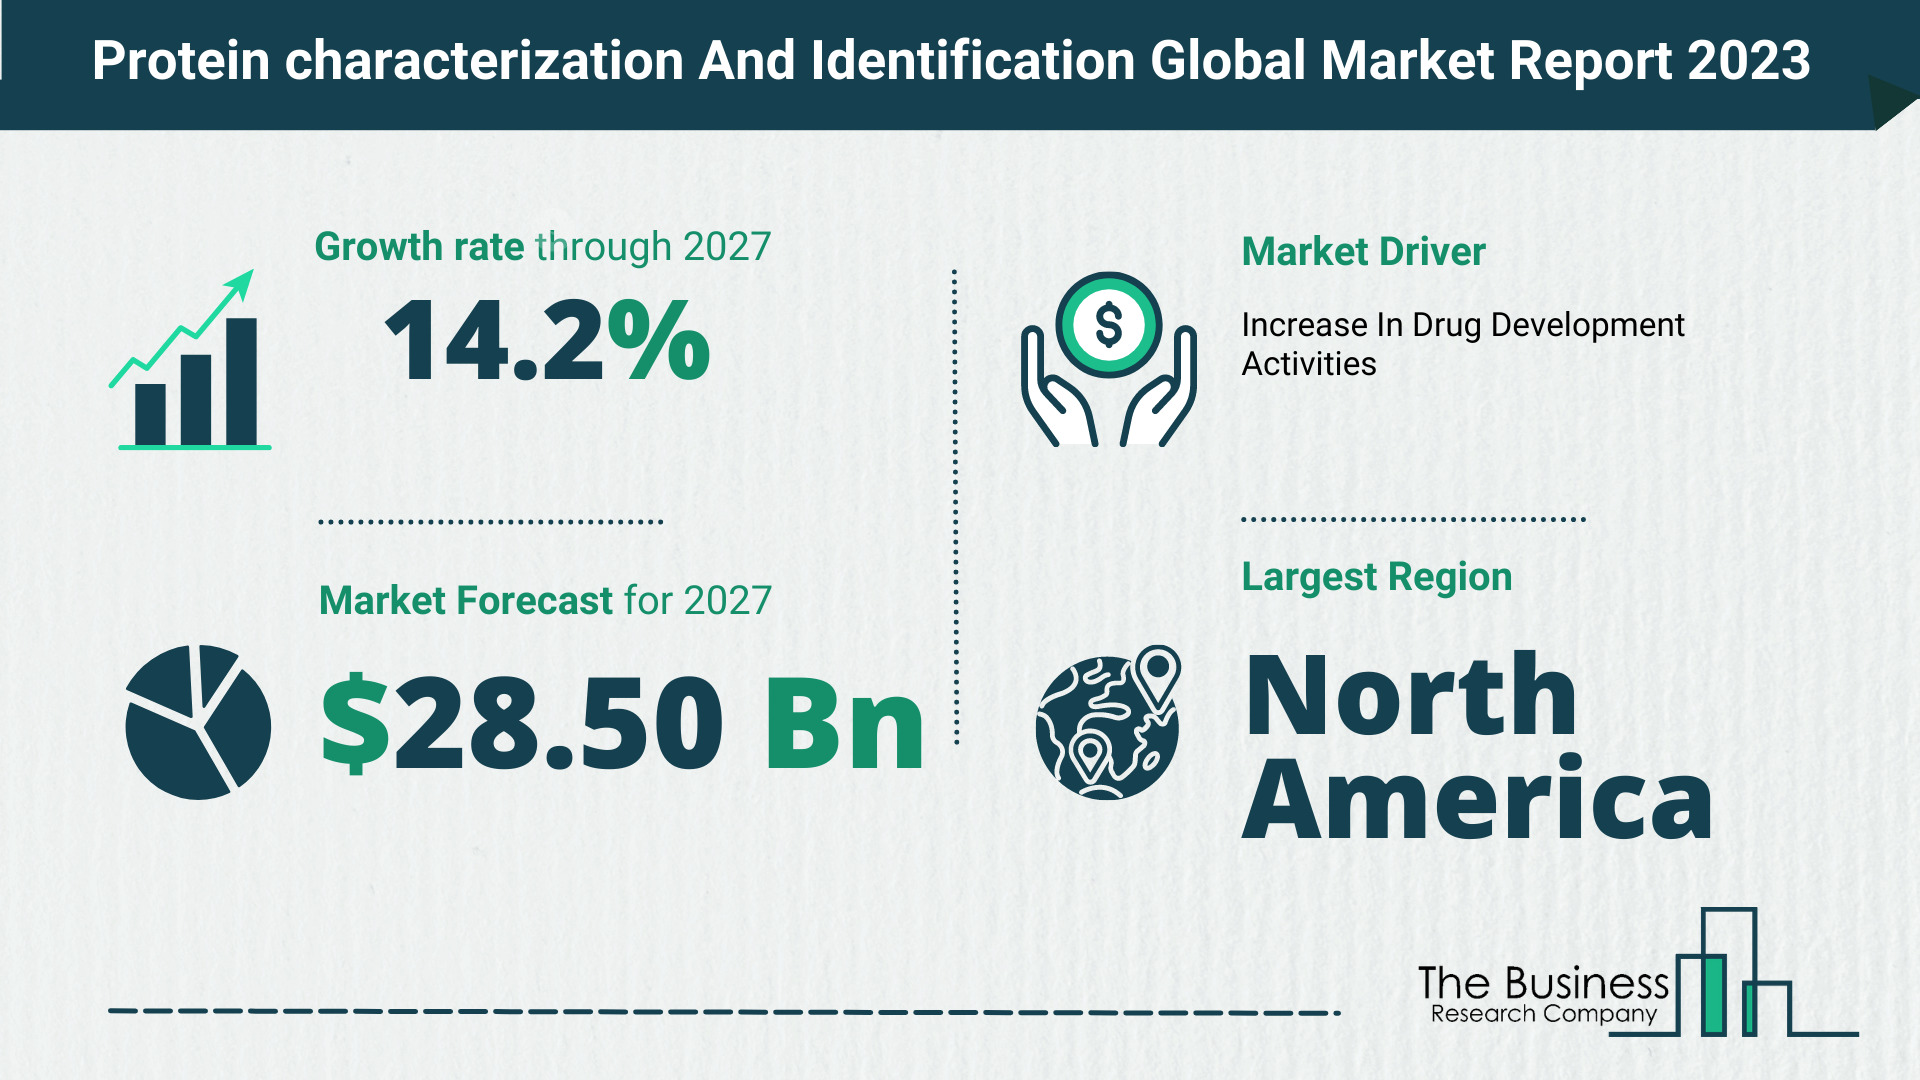 What Will The Protein characterization And Identification Market Look Like In 2023?